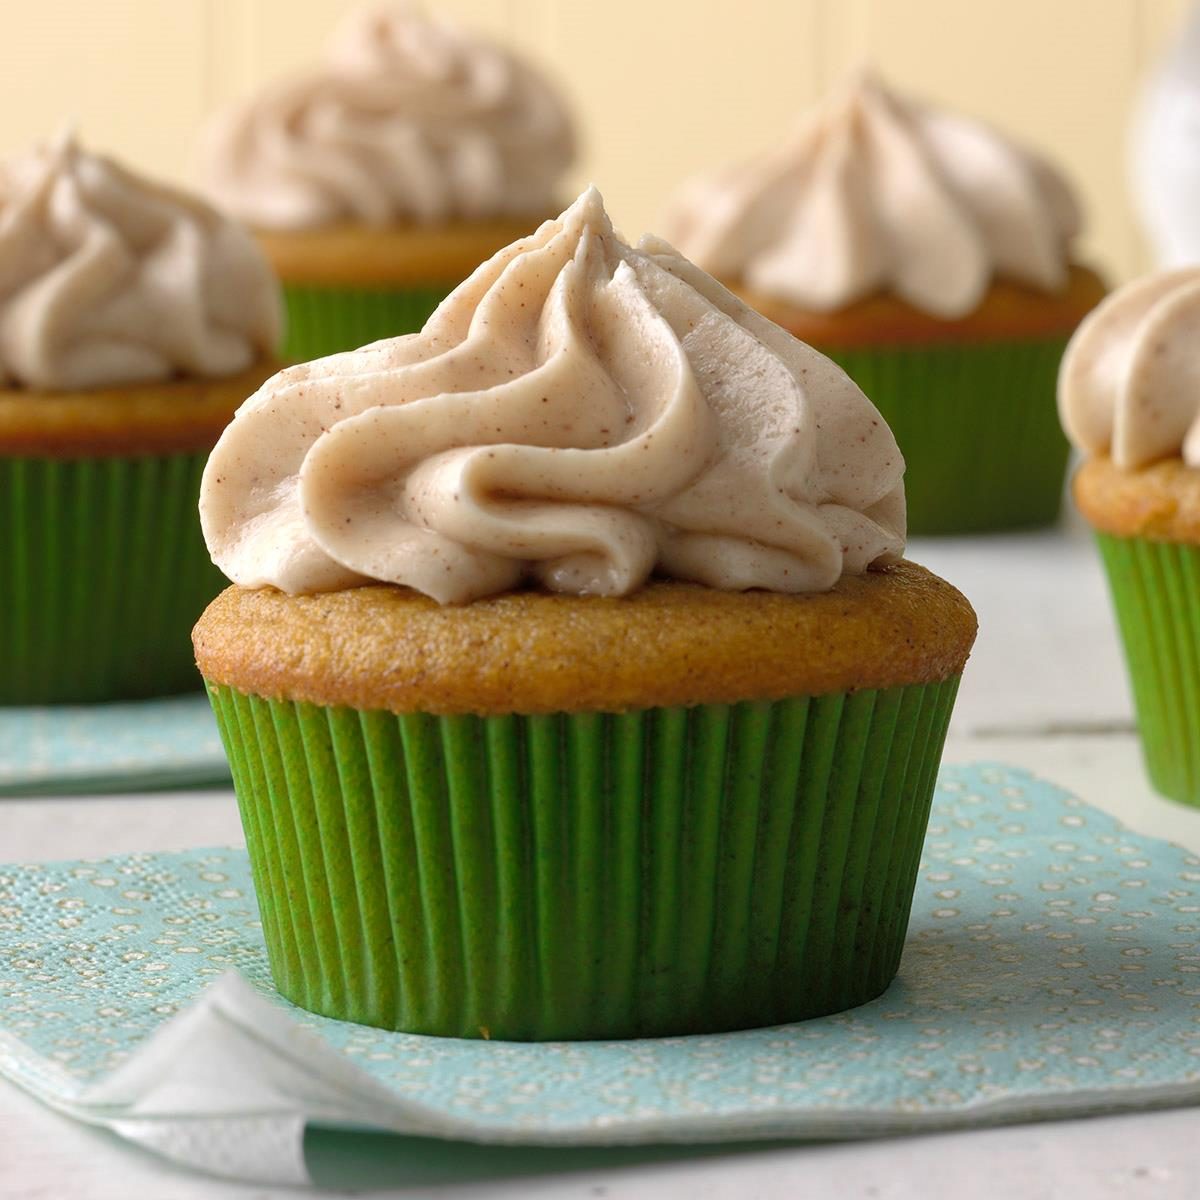 Pumpkin Spice Cupcakes With Cream Cheese Frosting Exps Mrmz16 42386 B09 16 6b 18